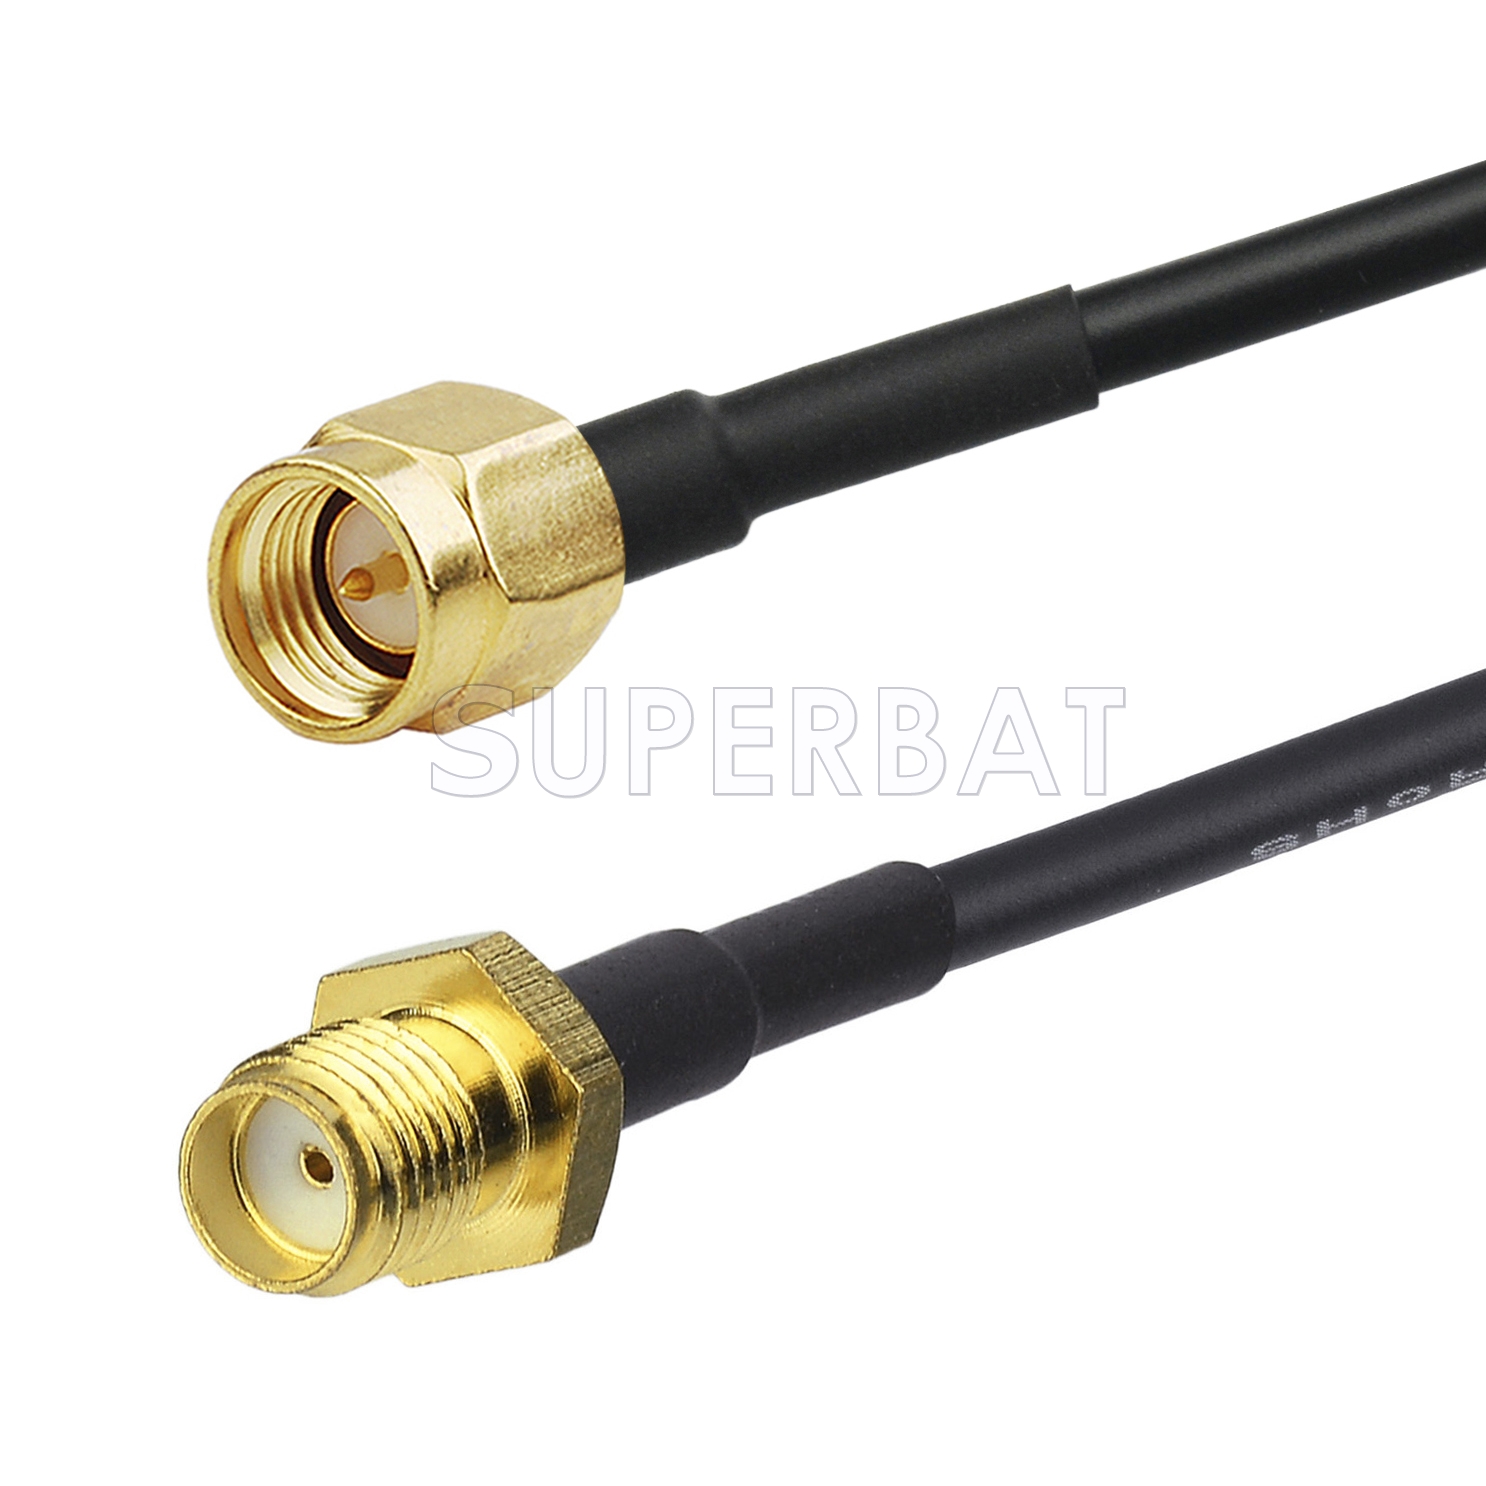 Nisaea 65FT SMA Antenna Adapter Male to Female with Connecting Line 20 Meters RG58 Coaxial Cable SMA Male to SMA Female Car Radio Video Antenna Extension Coax Cable Pure Copper 